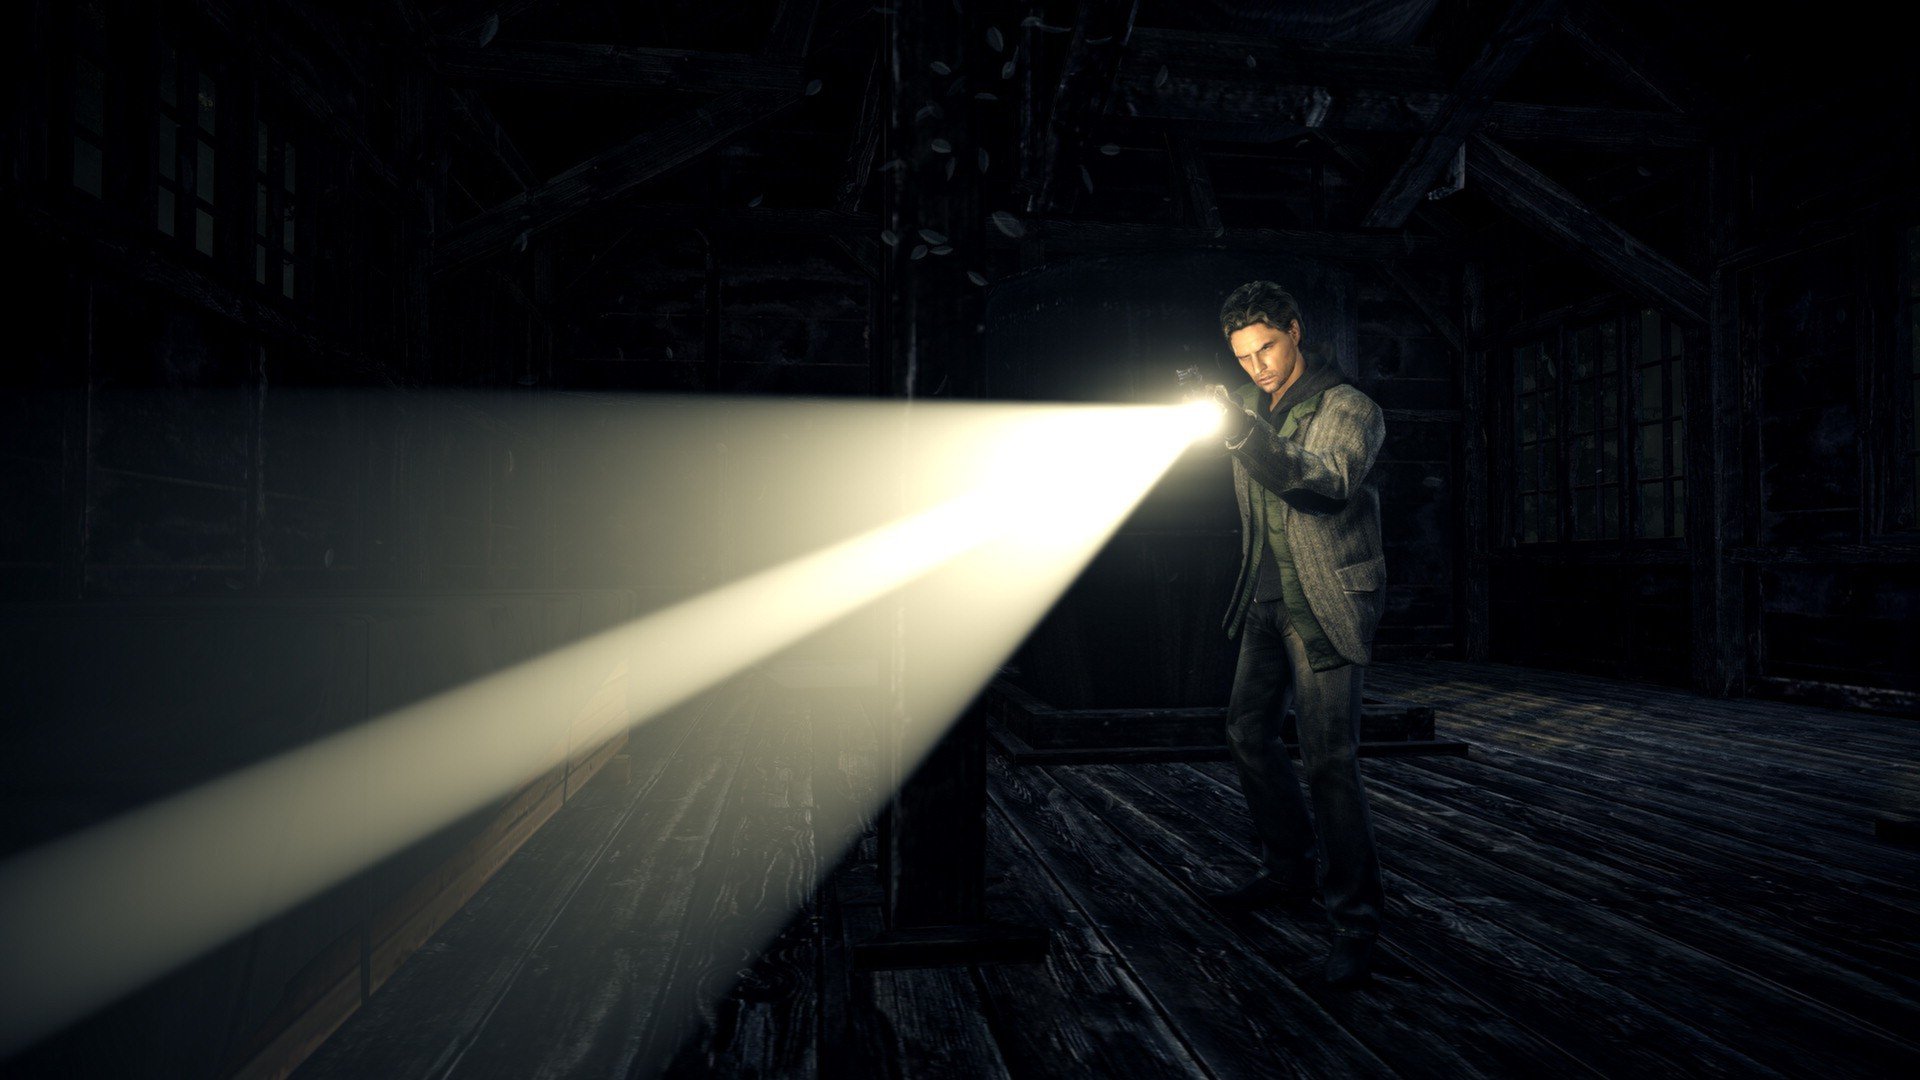 Stephen King gifted Alan Wake's opening quote to Remedy for just $1